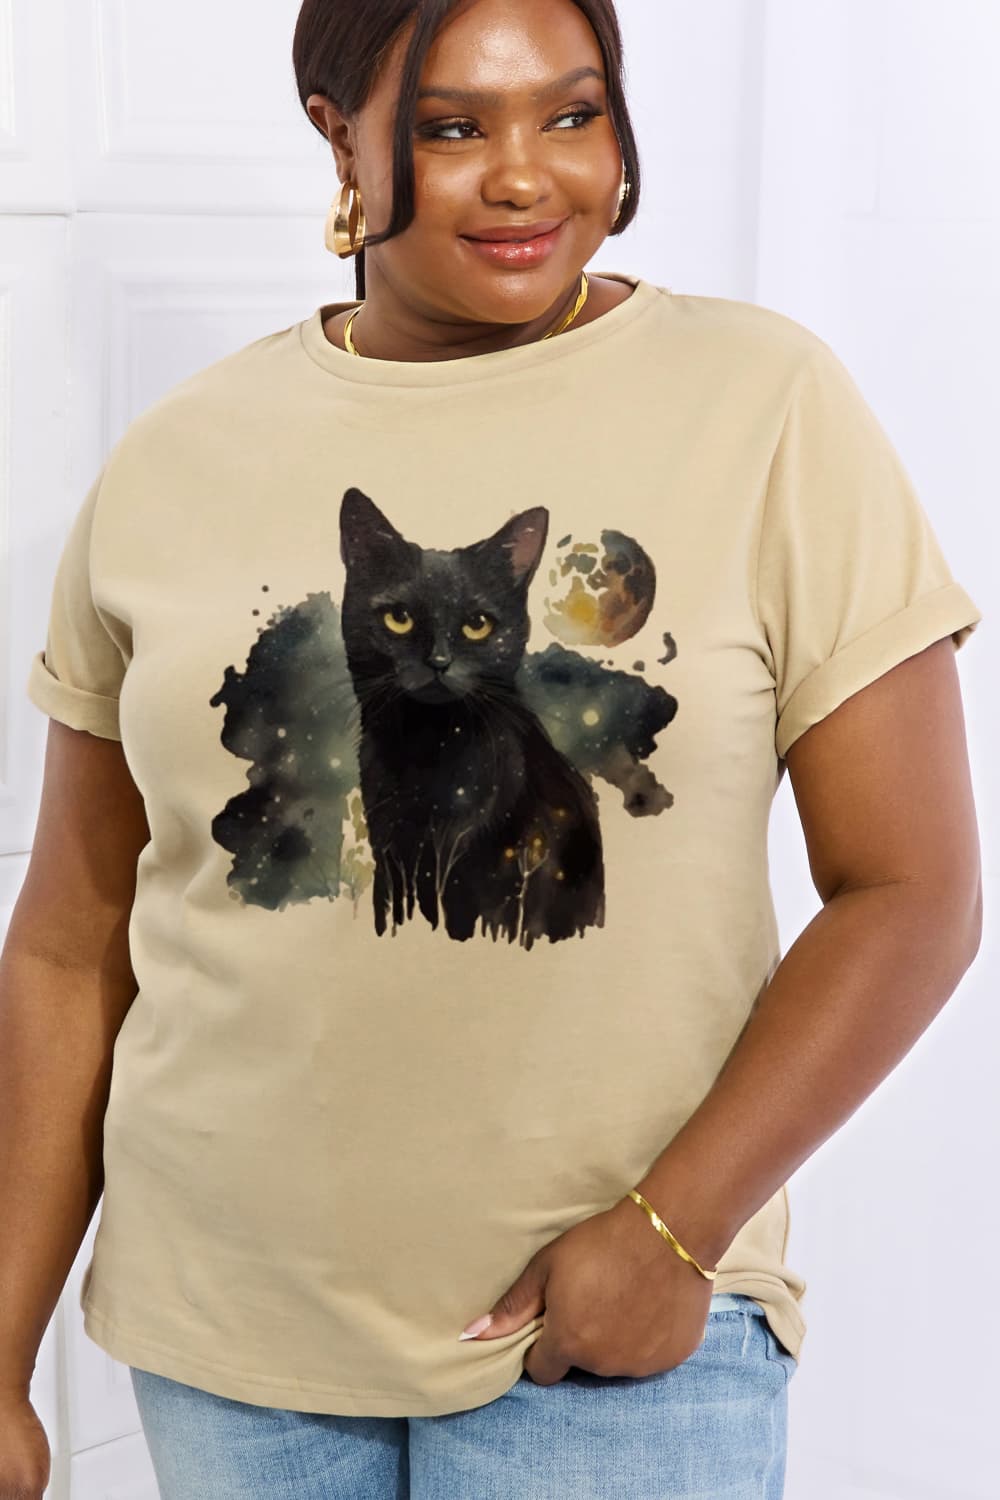 Simply Love Full Size Black Cat Graphic Cotton Tee